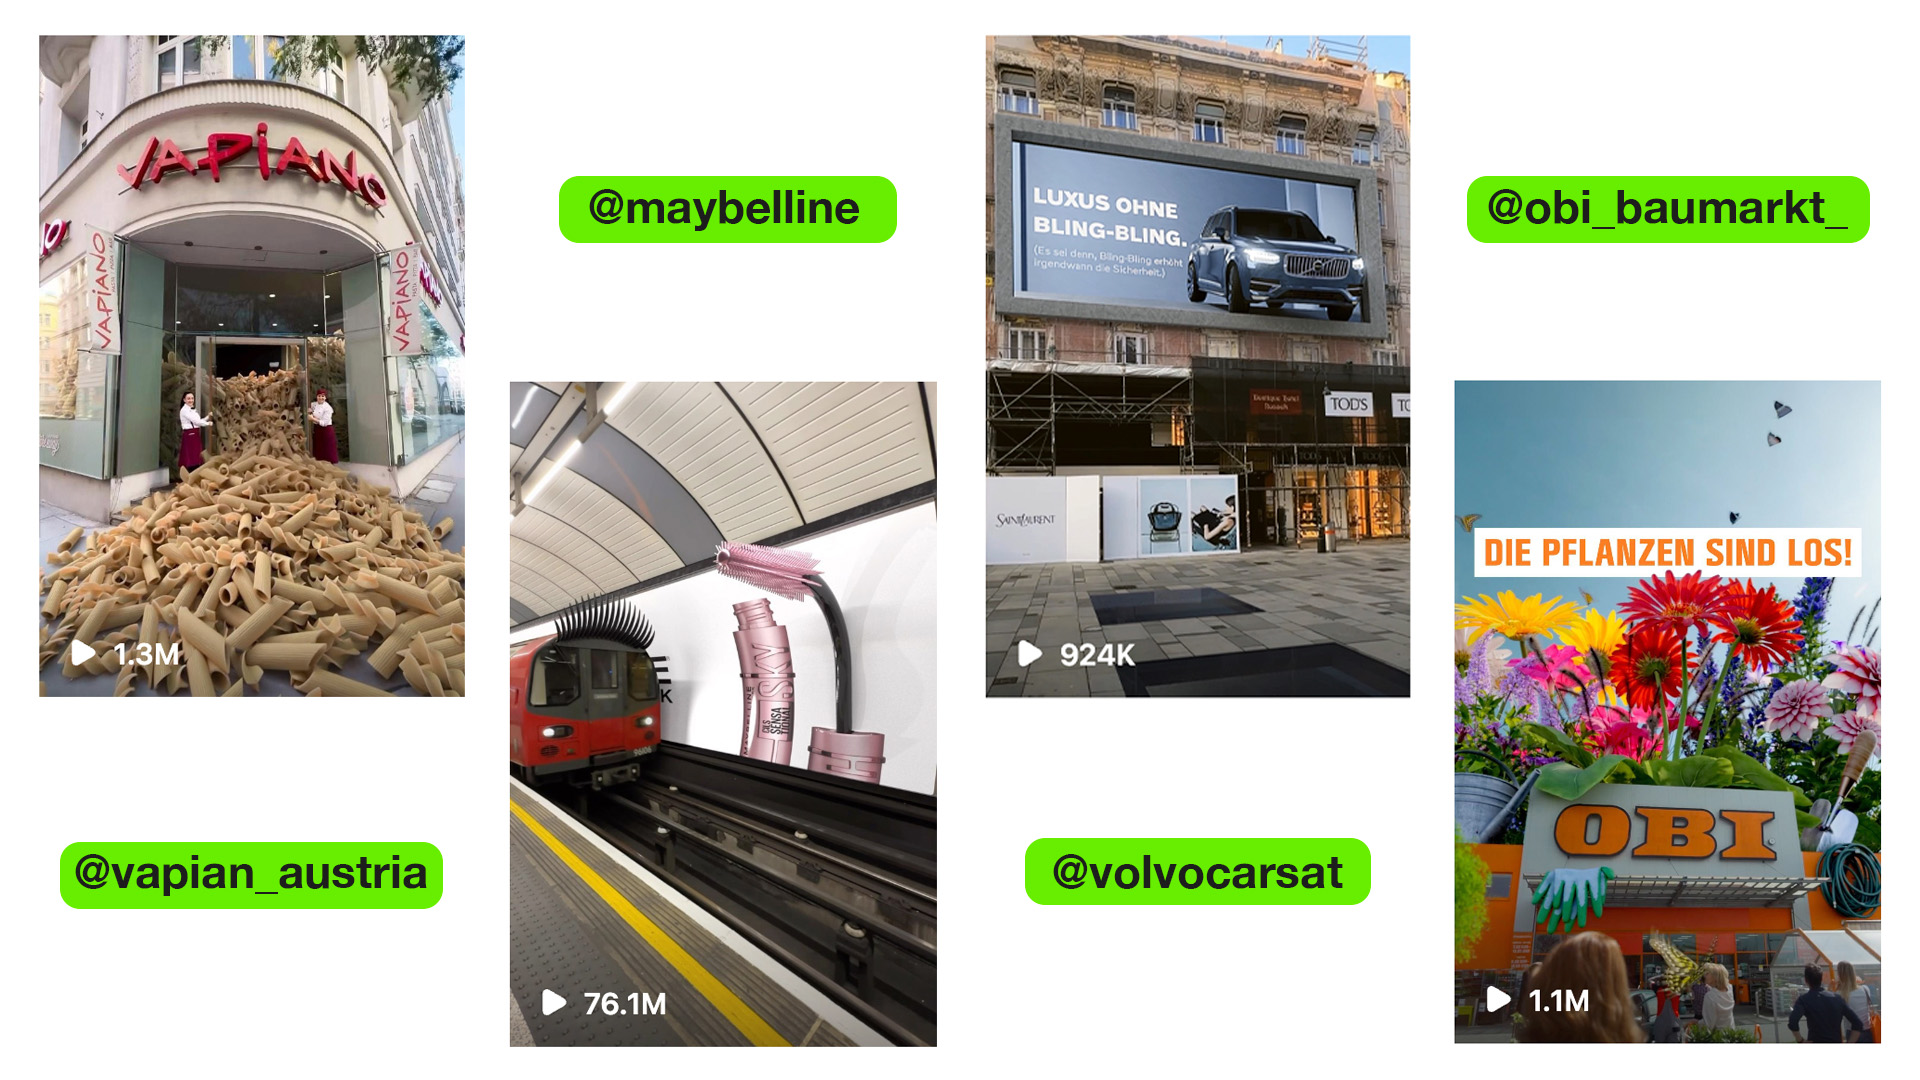 fake out of home advertising examples from vapiano austria, maybelline, volvo austria and obi